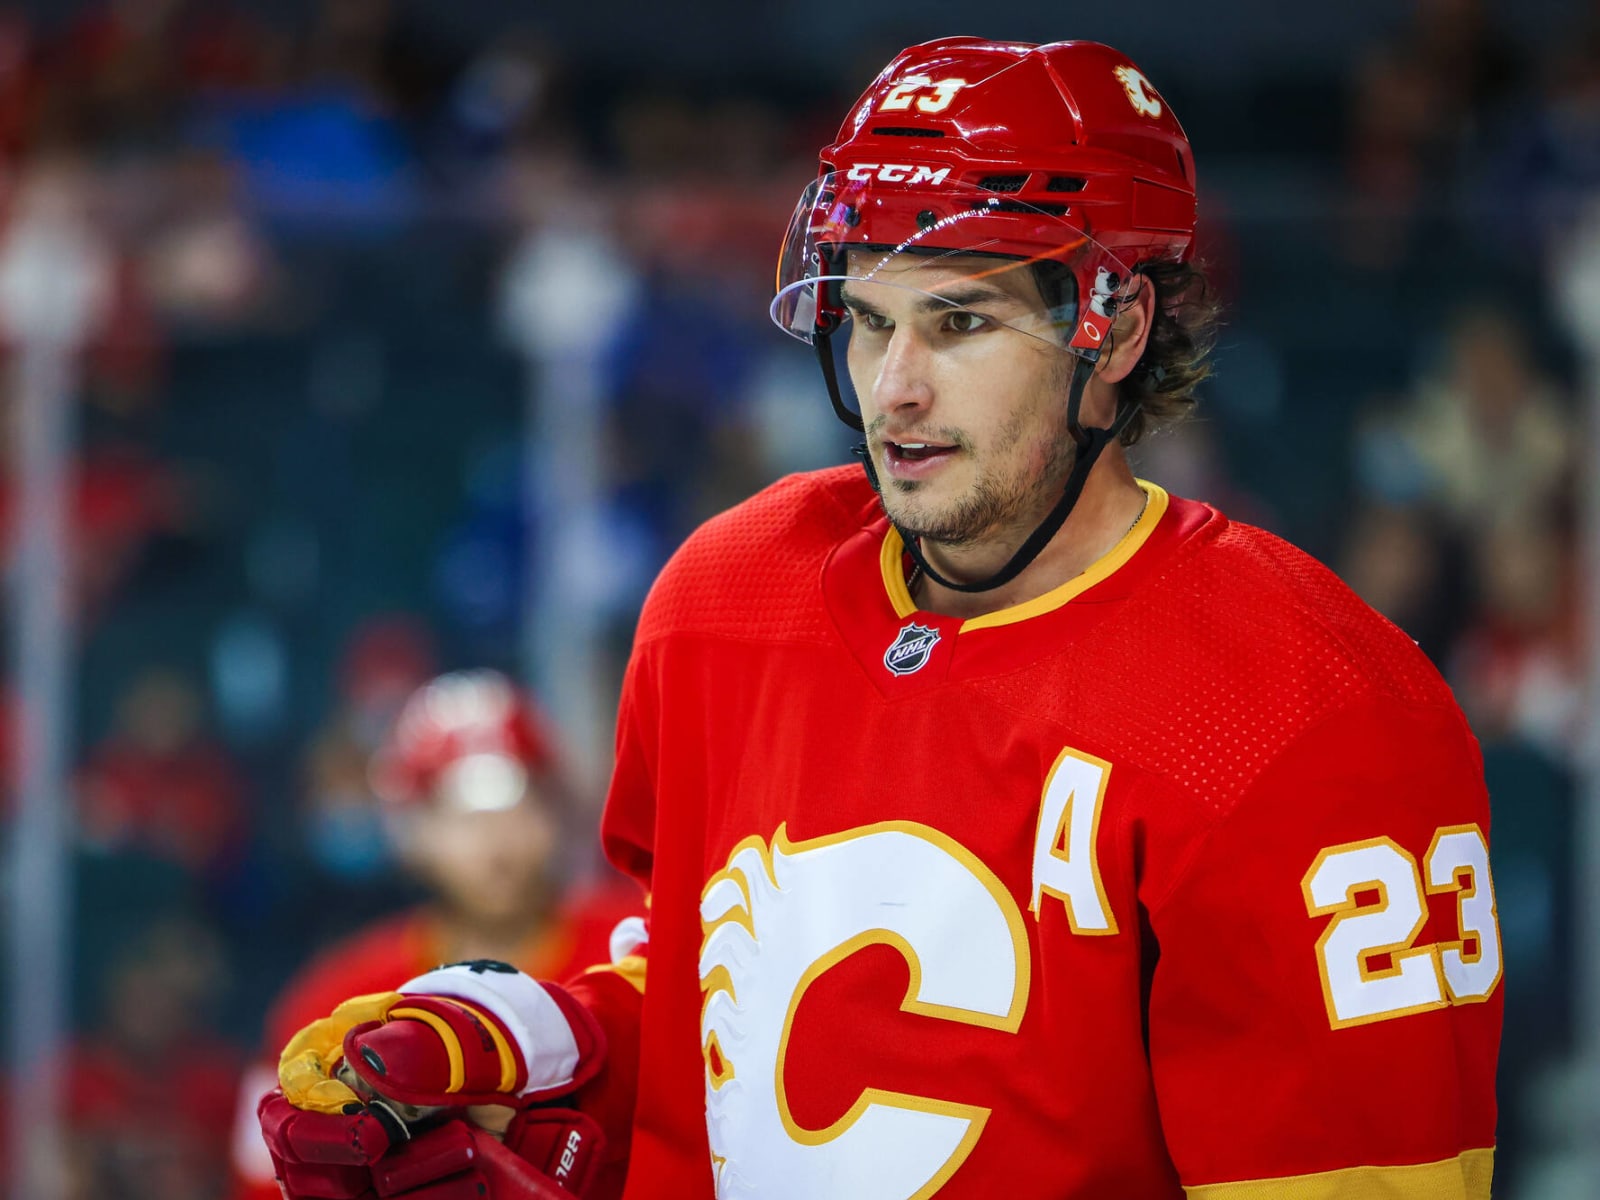 BREAKING: Flames to Sign Kadri, Trade Monahan - Matchsticks and